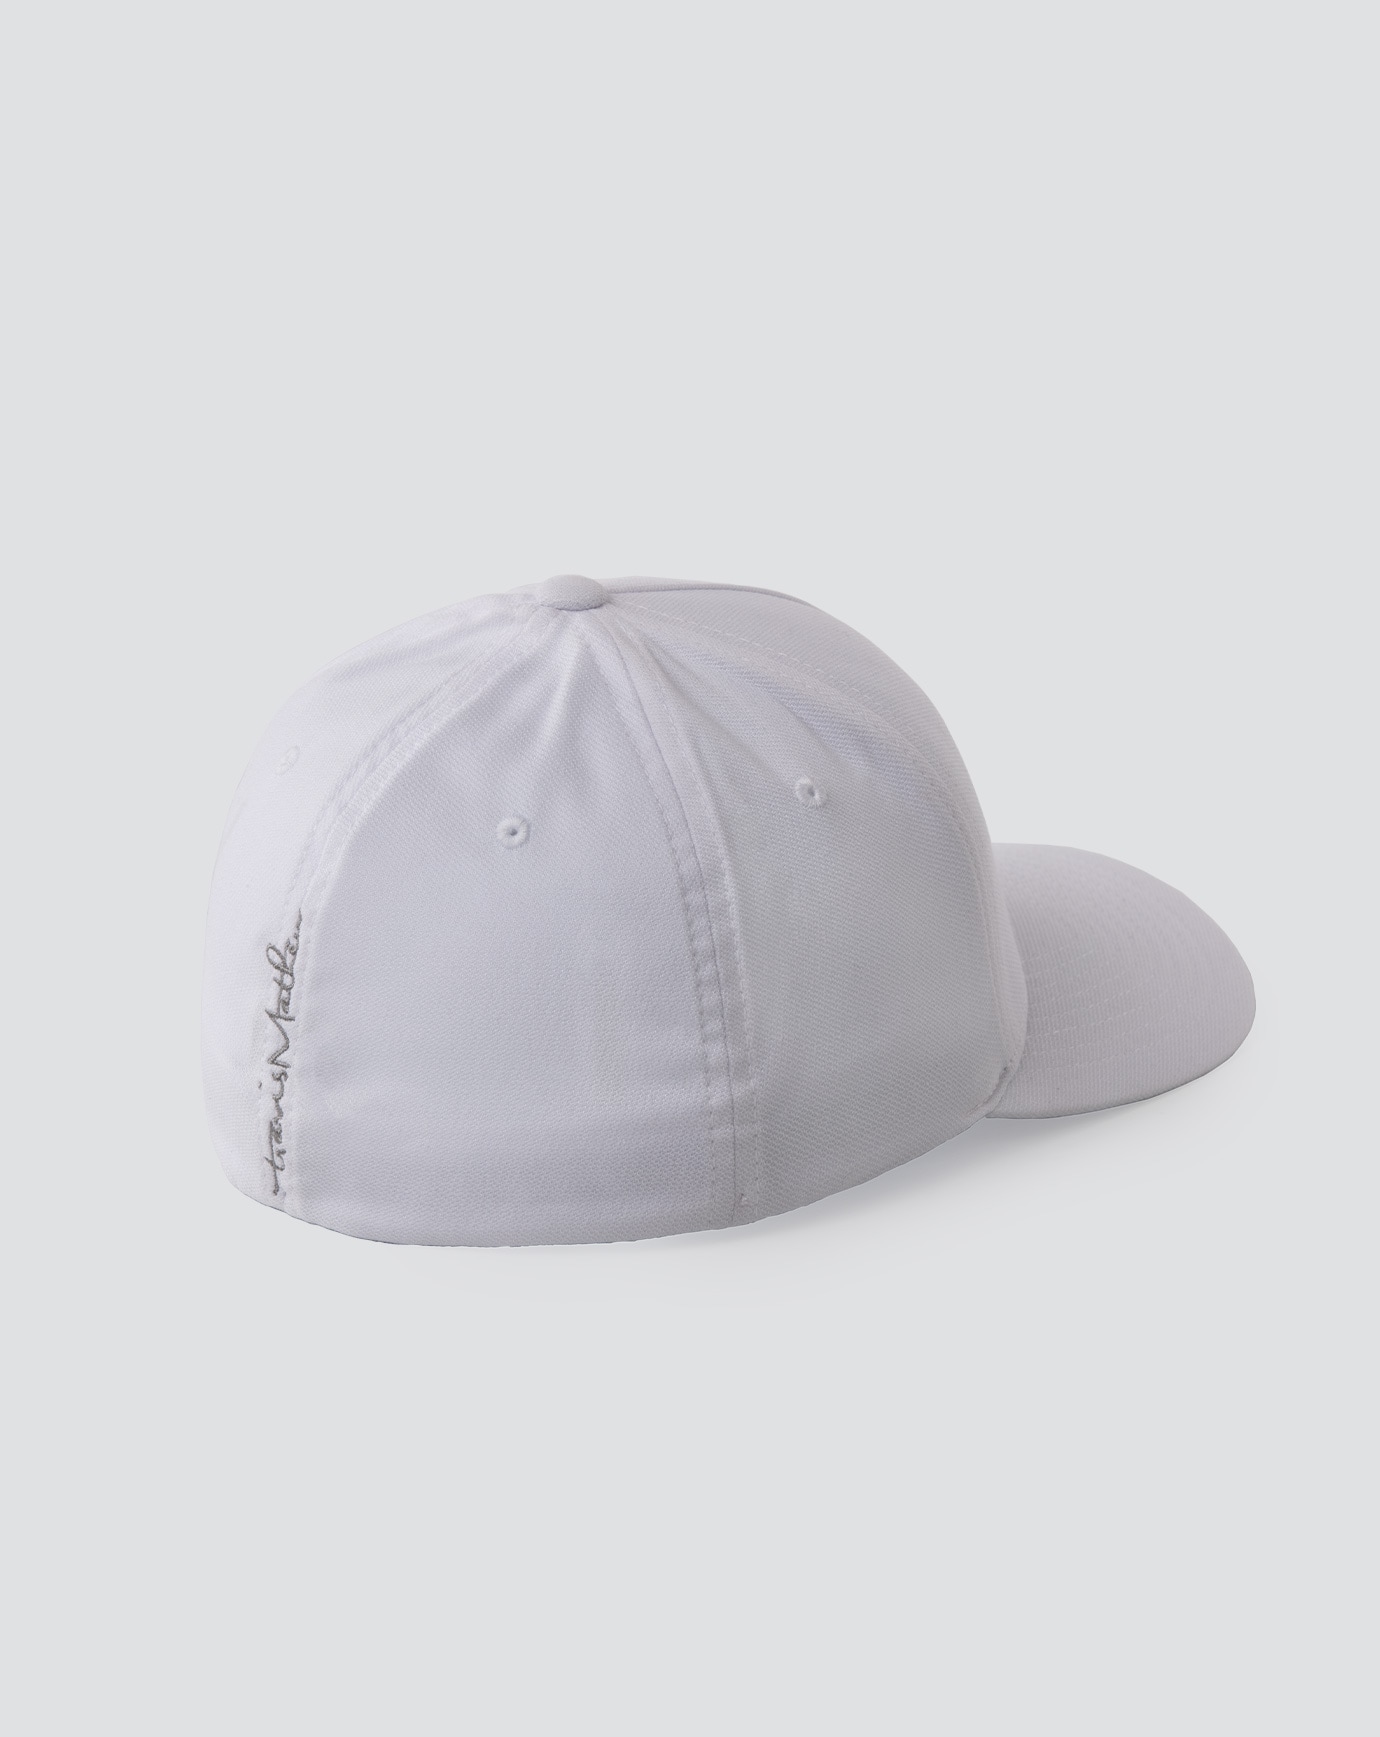 BEACON HILL FITTED HAT Image Thumbnail 3